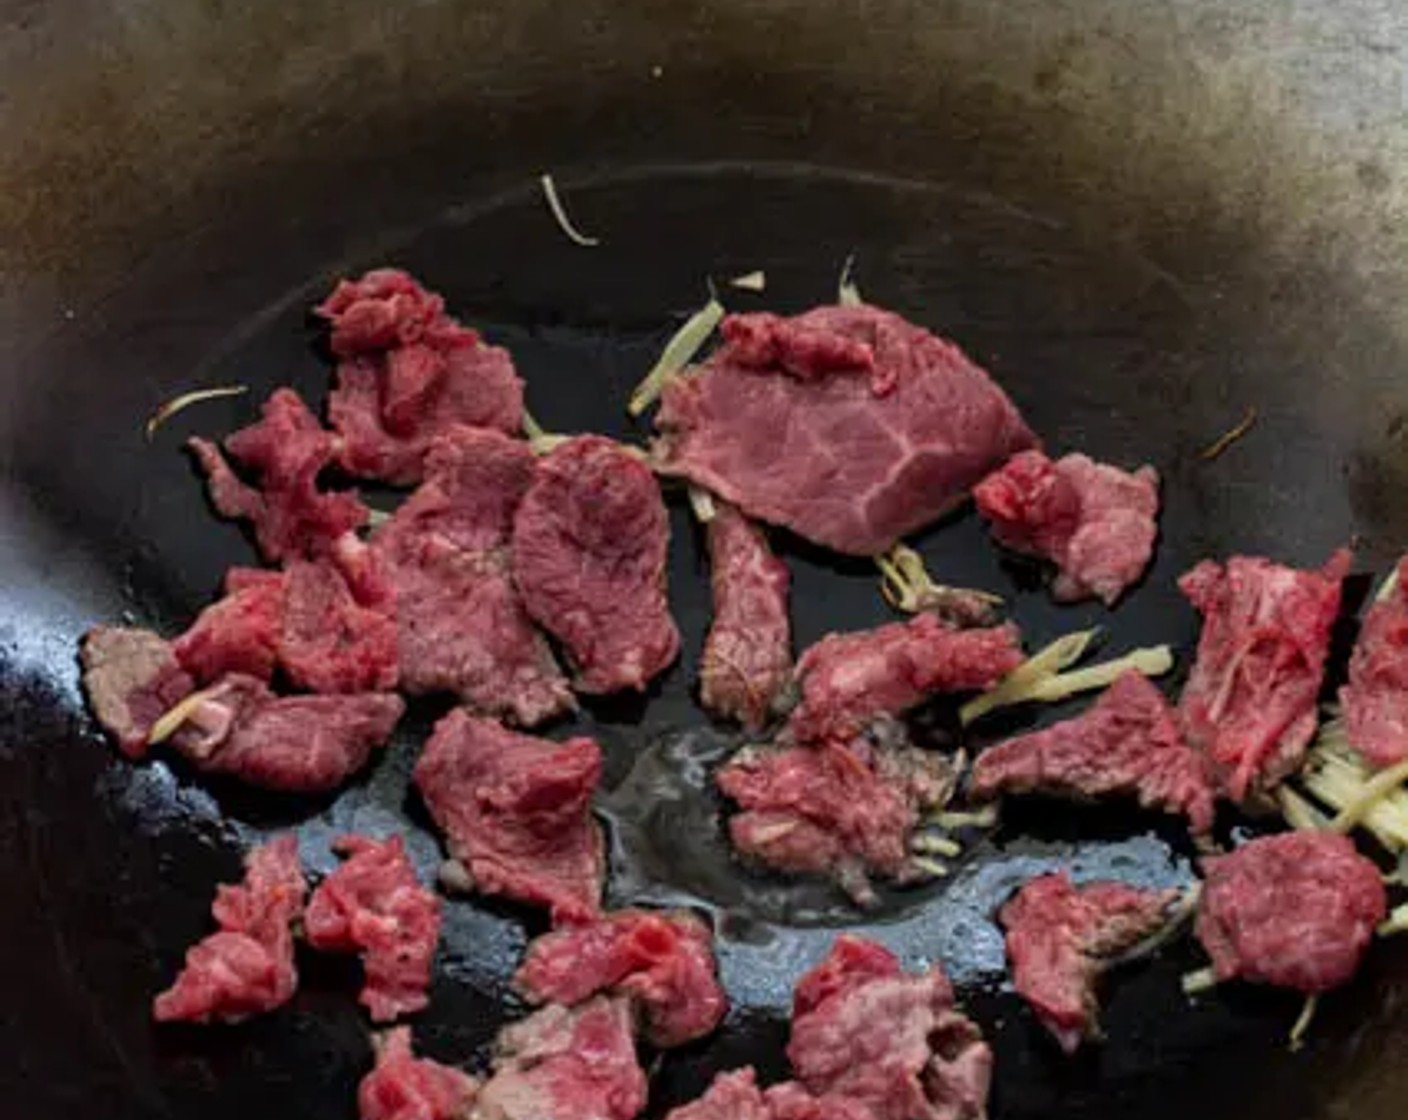 step 5 Stir-fry the beef in small batches for 1 minute, it will allow the beef to sear properly in the wok. For each batch, spread the beef out in a single layer in the wok.